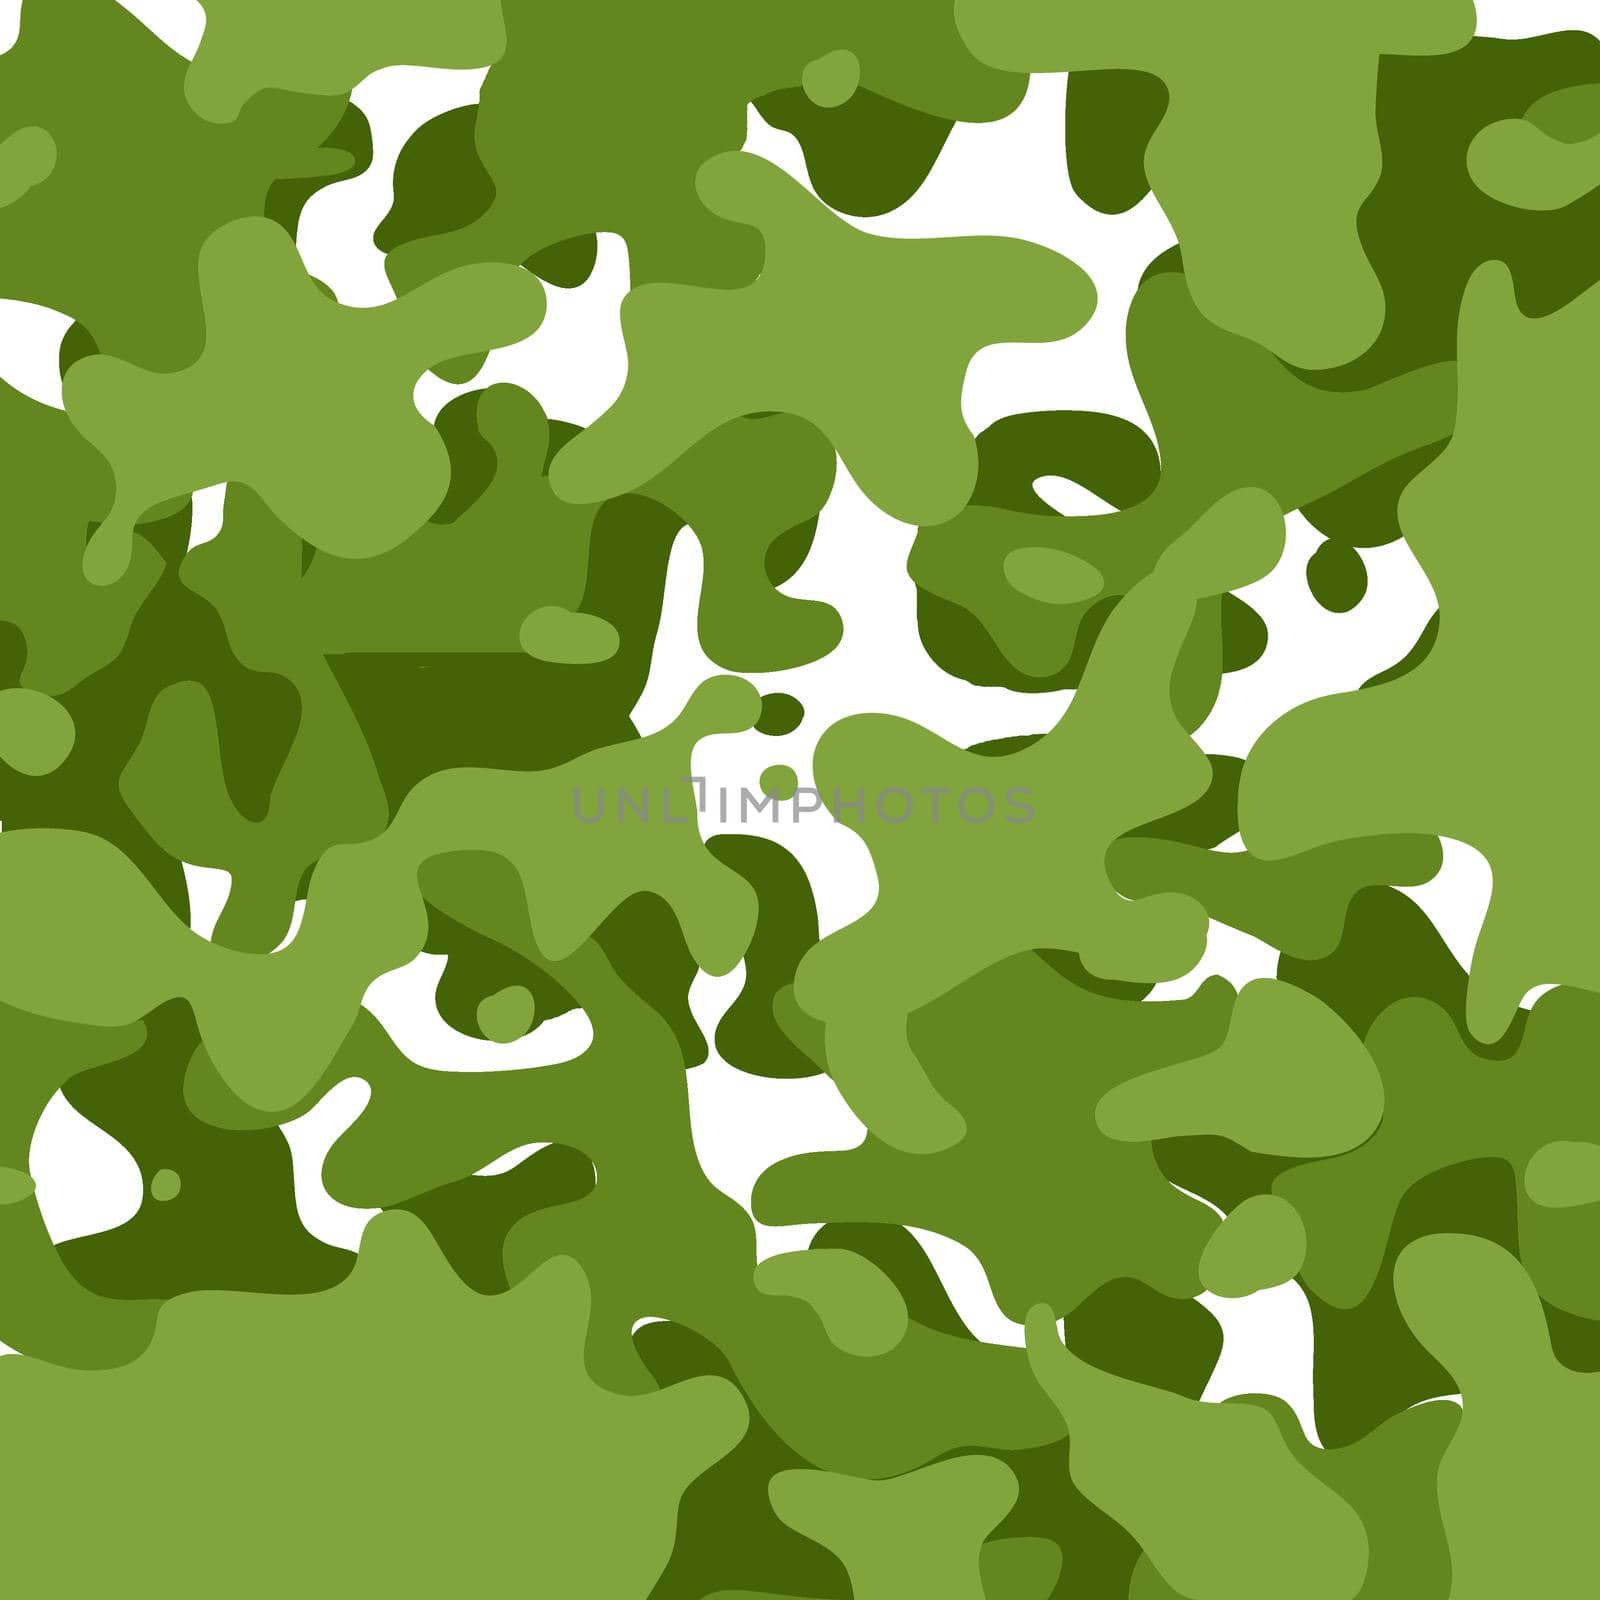 Camouflage background with green spots on a white background by Mastak80